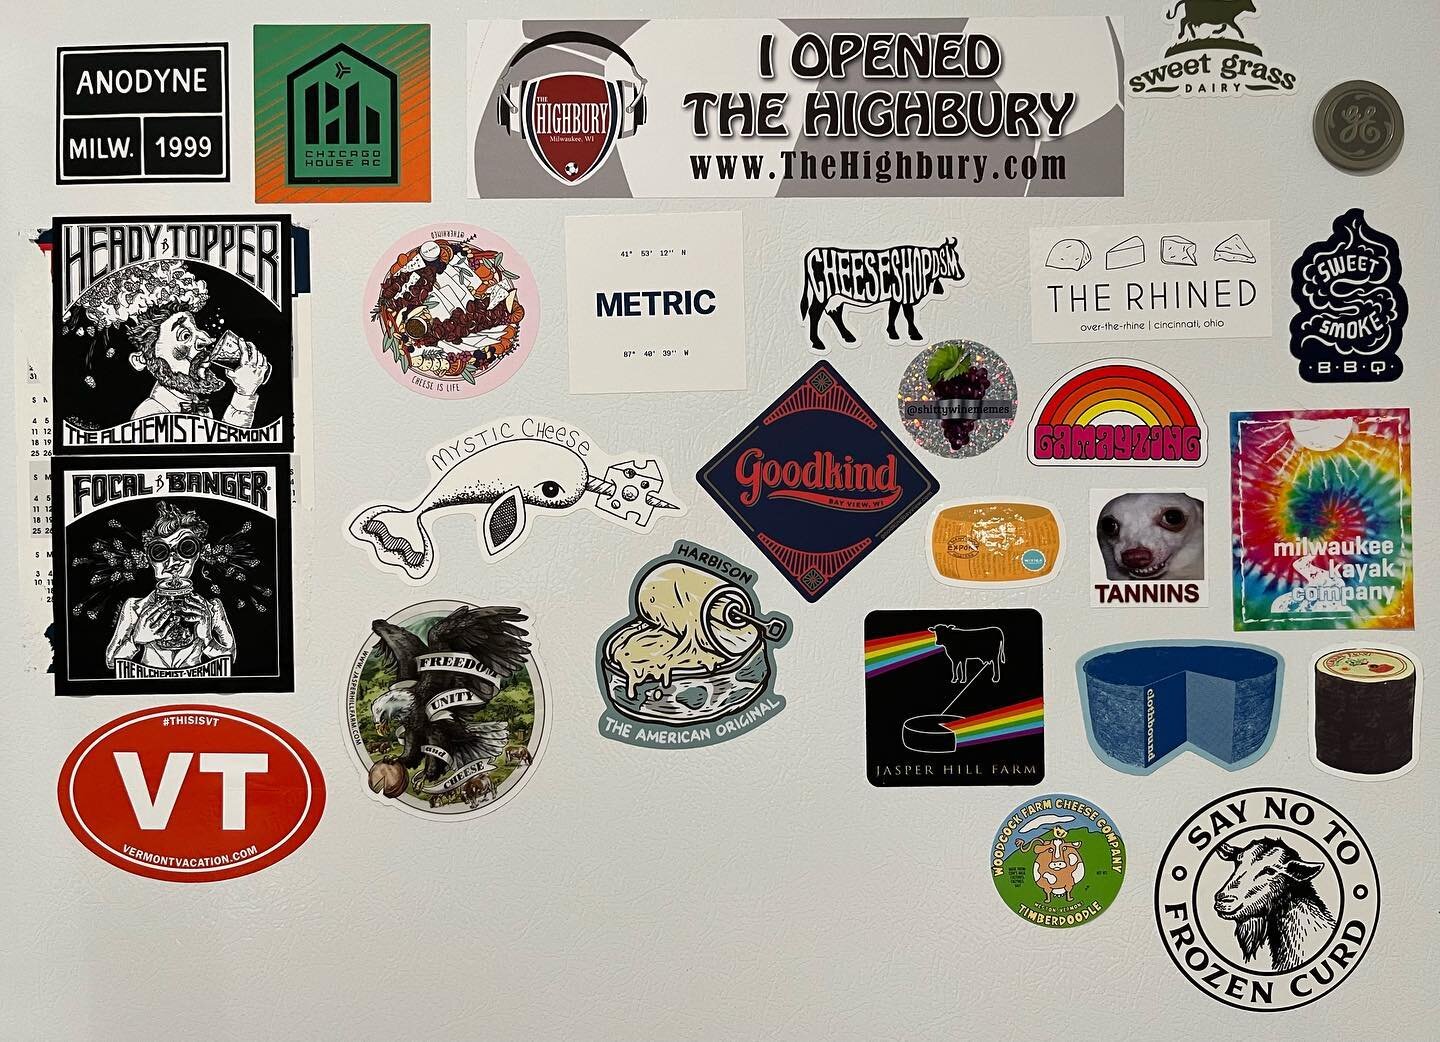 Got a little extra space on our culture fridge for a few more stickers! Send them our way!